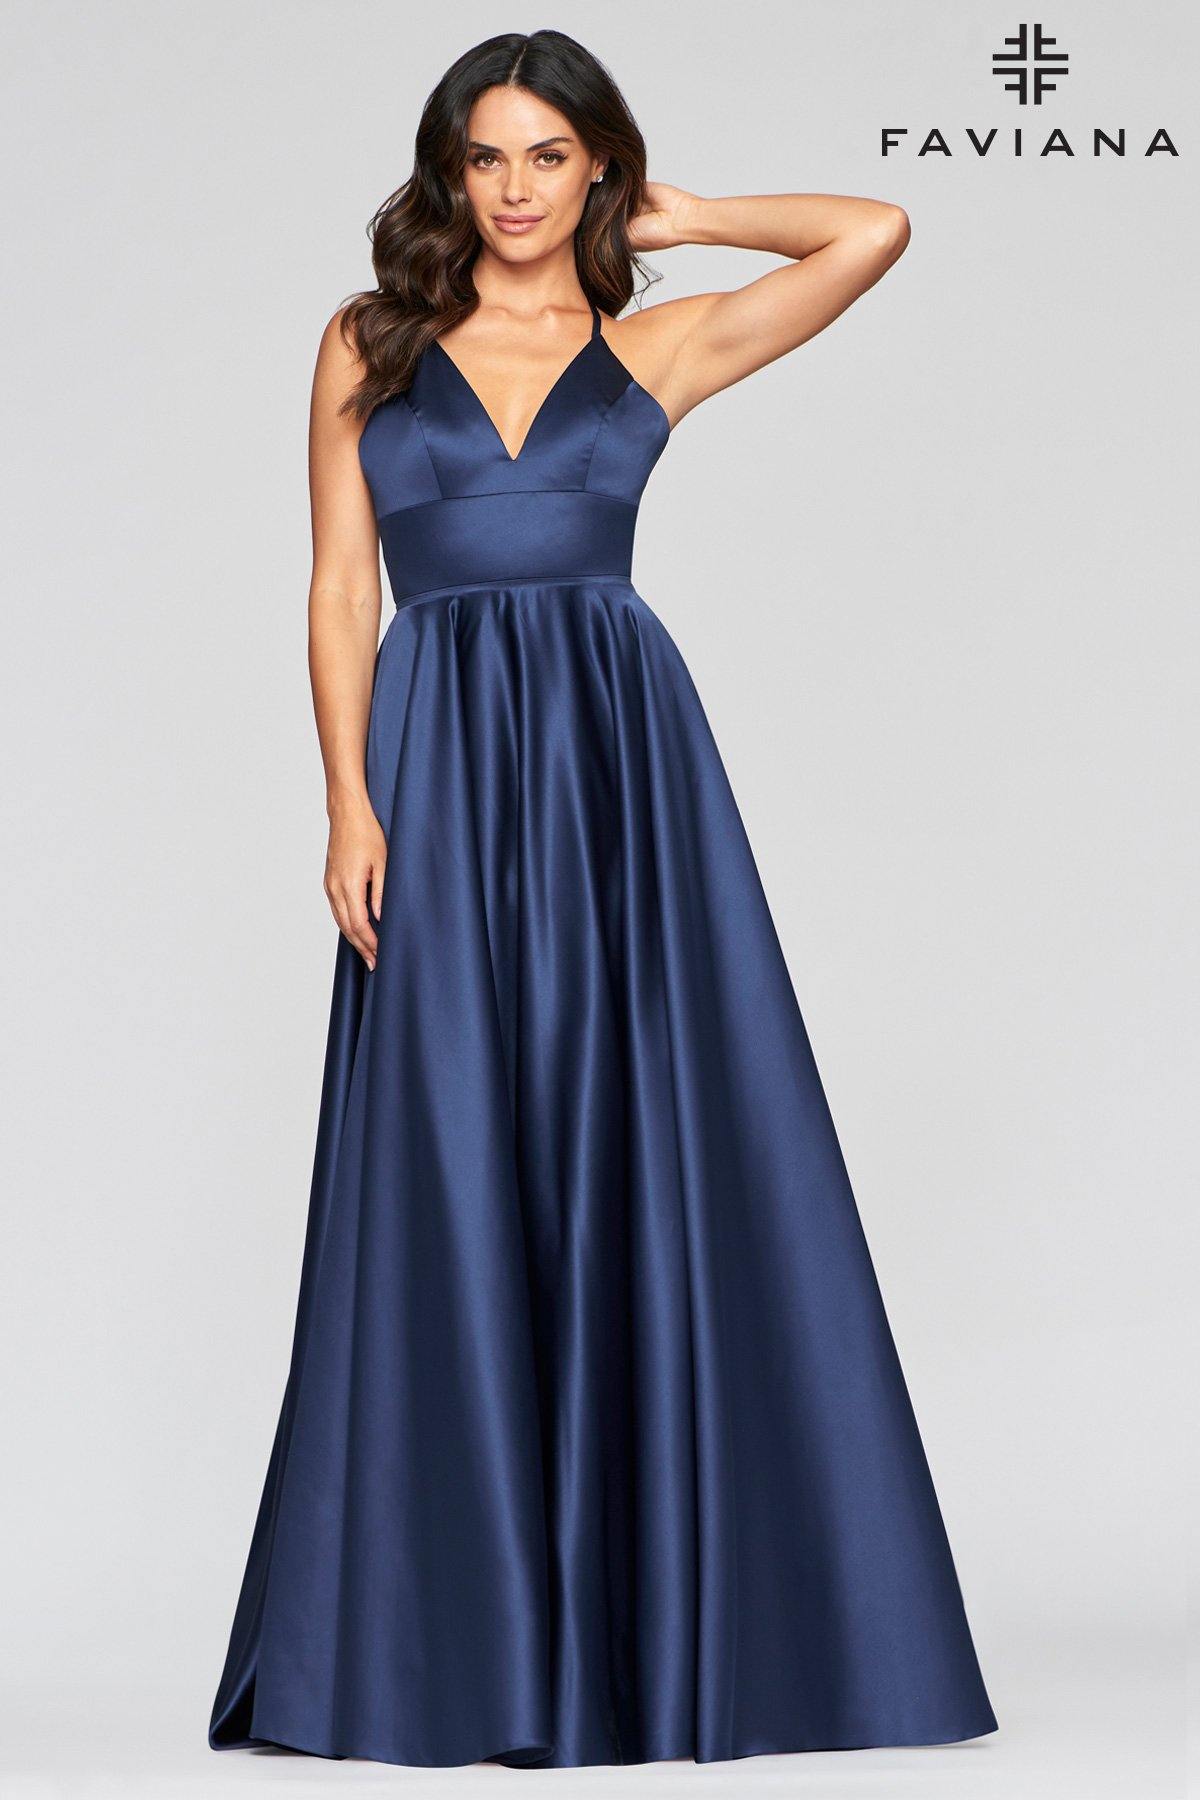 Faviana S10252 Long Bridesmaids Prom Ball Gown | The Dress Outlet